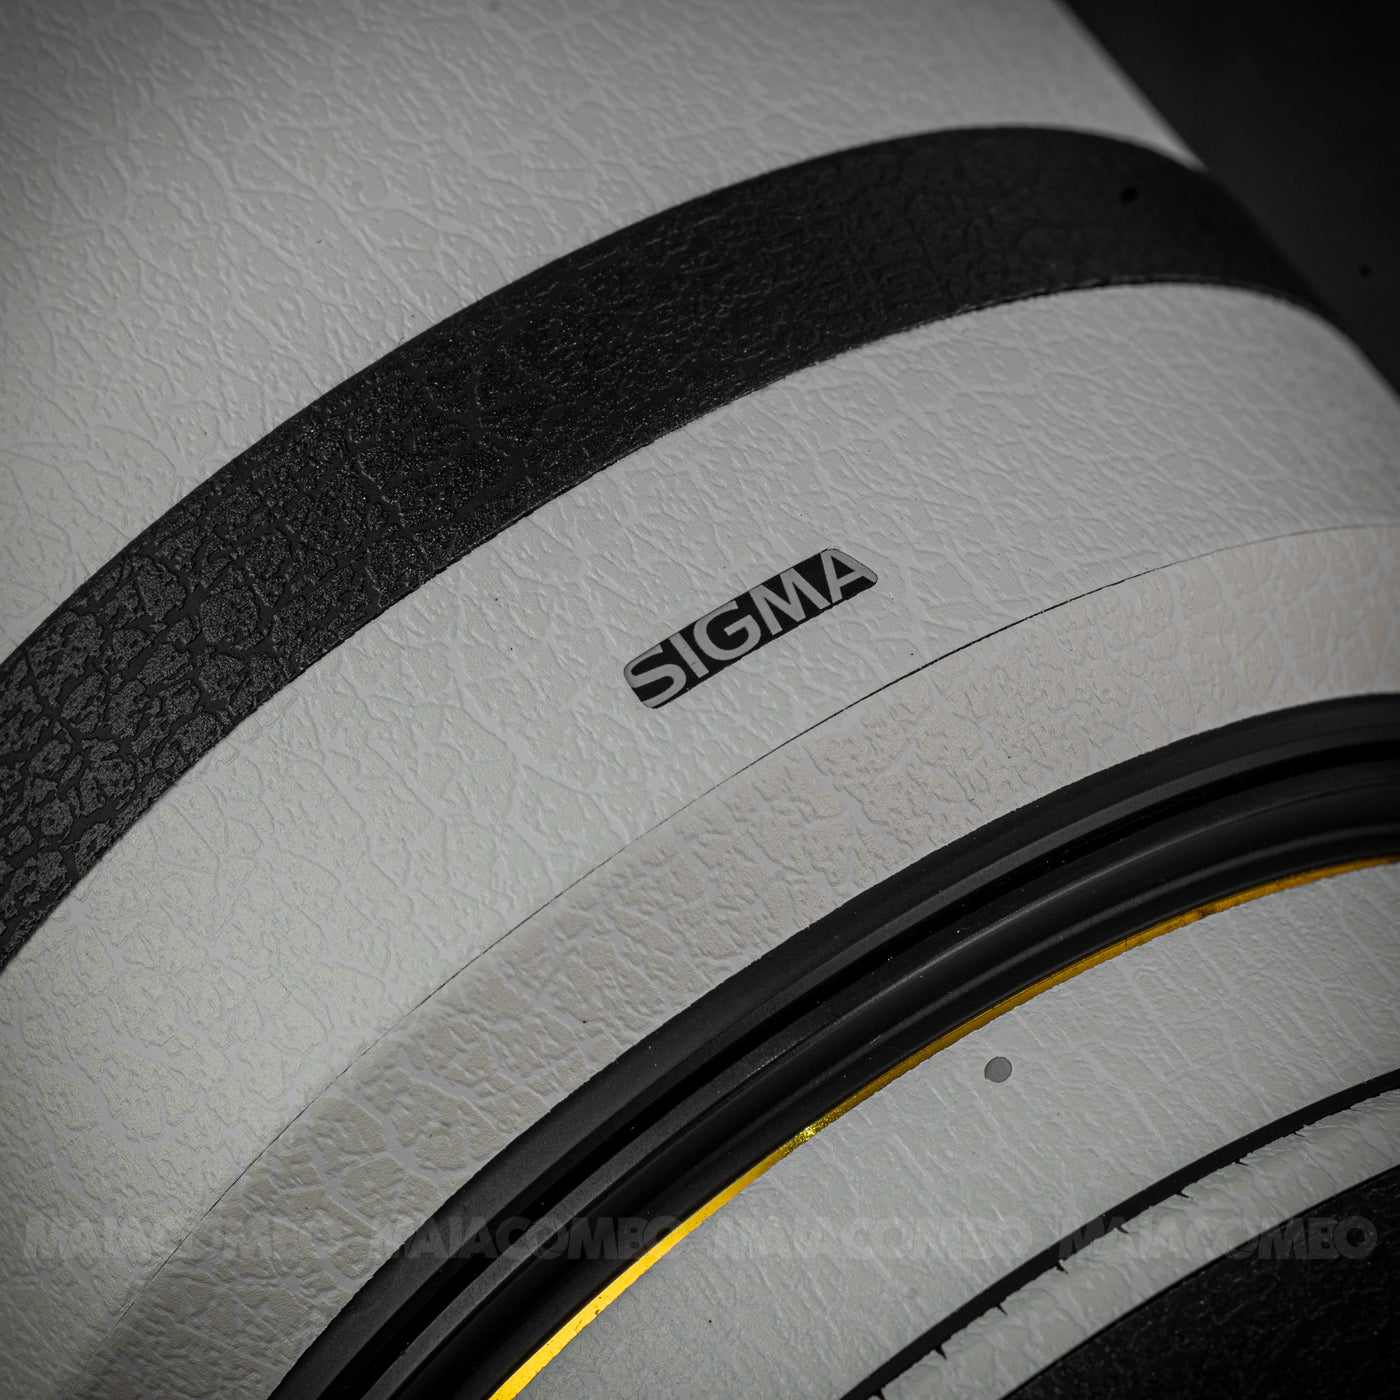 SIGMA 70-200mm F2.8 DG OS HSM SPORT Lens Skin For CANON